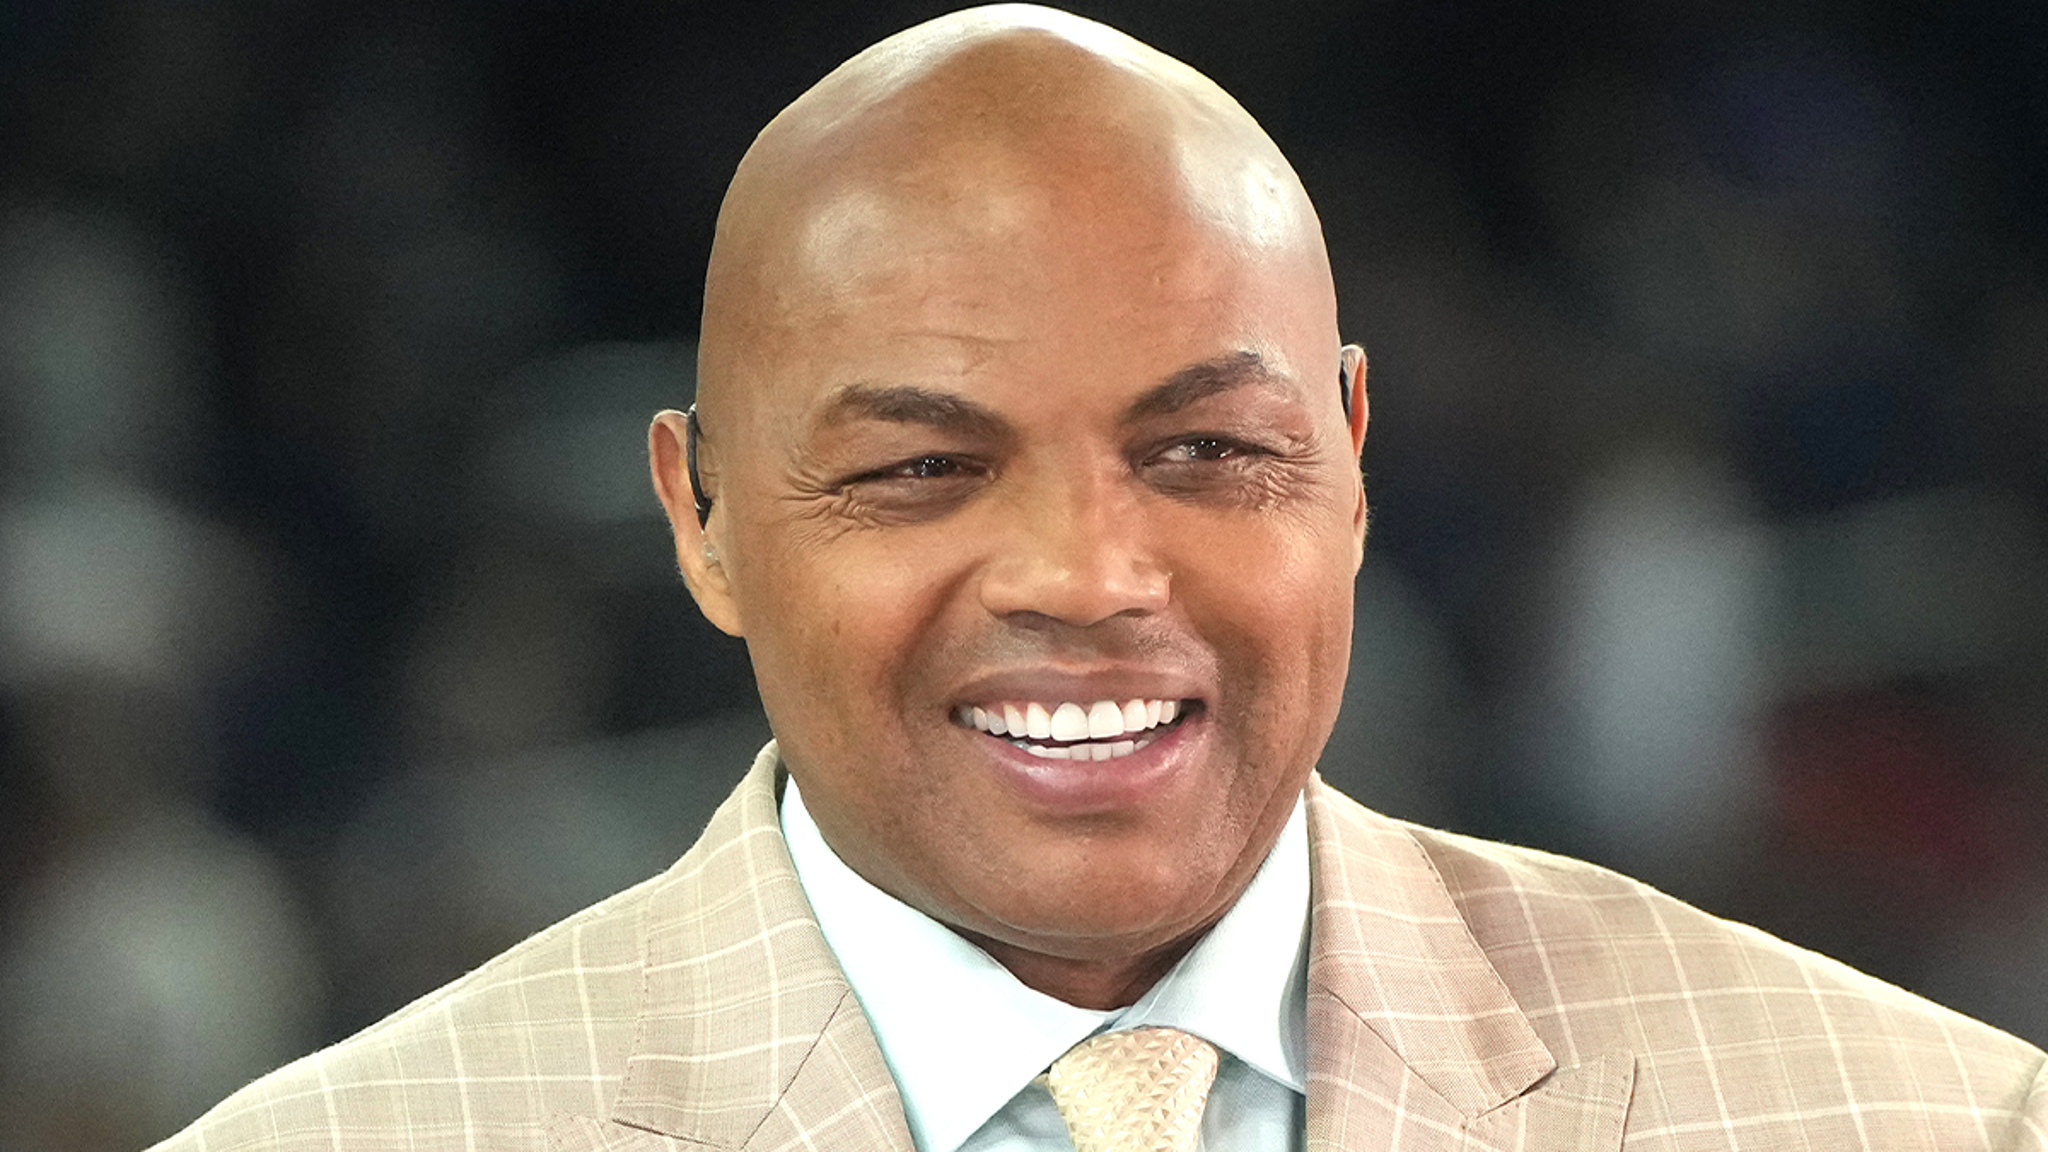 Charles Barkley Donating $5 Million to Auburn After SCOTUS Affirmative Action Ruling